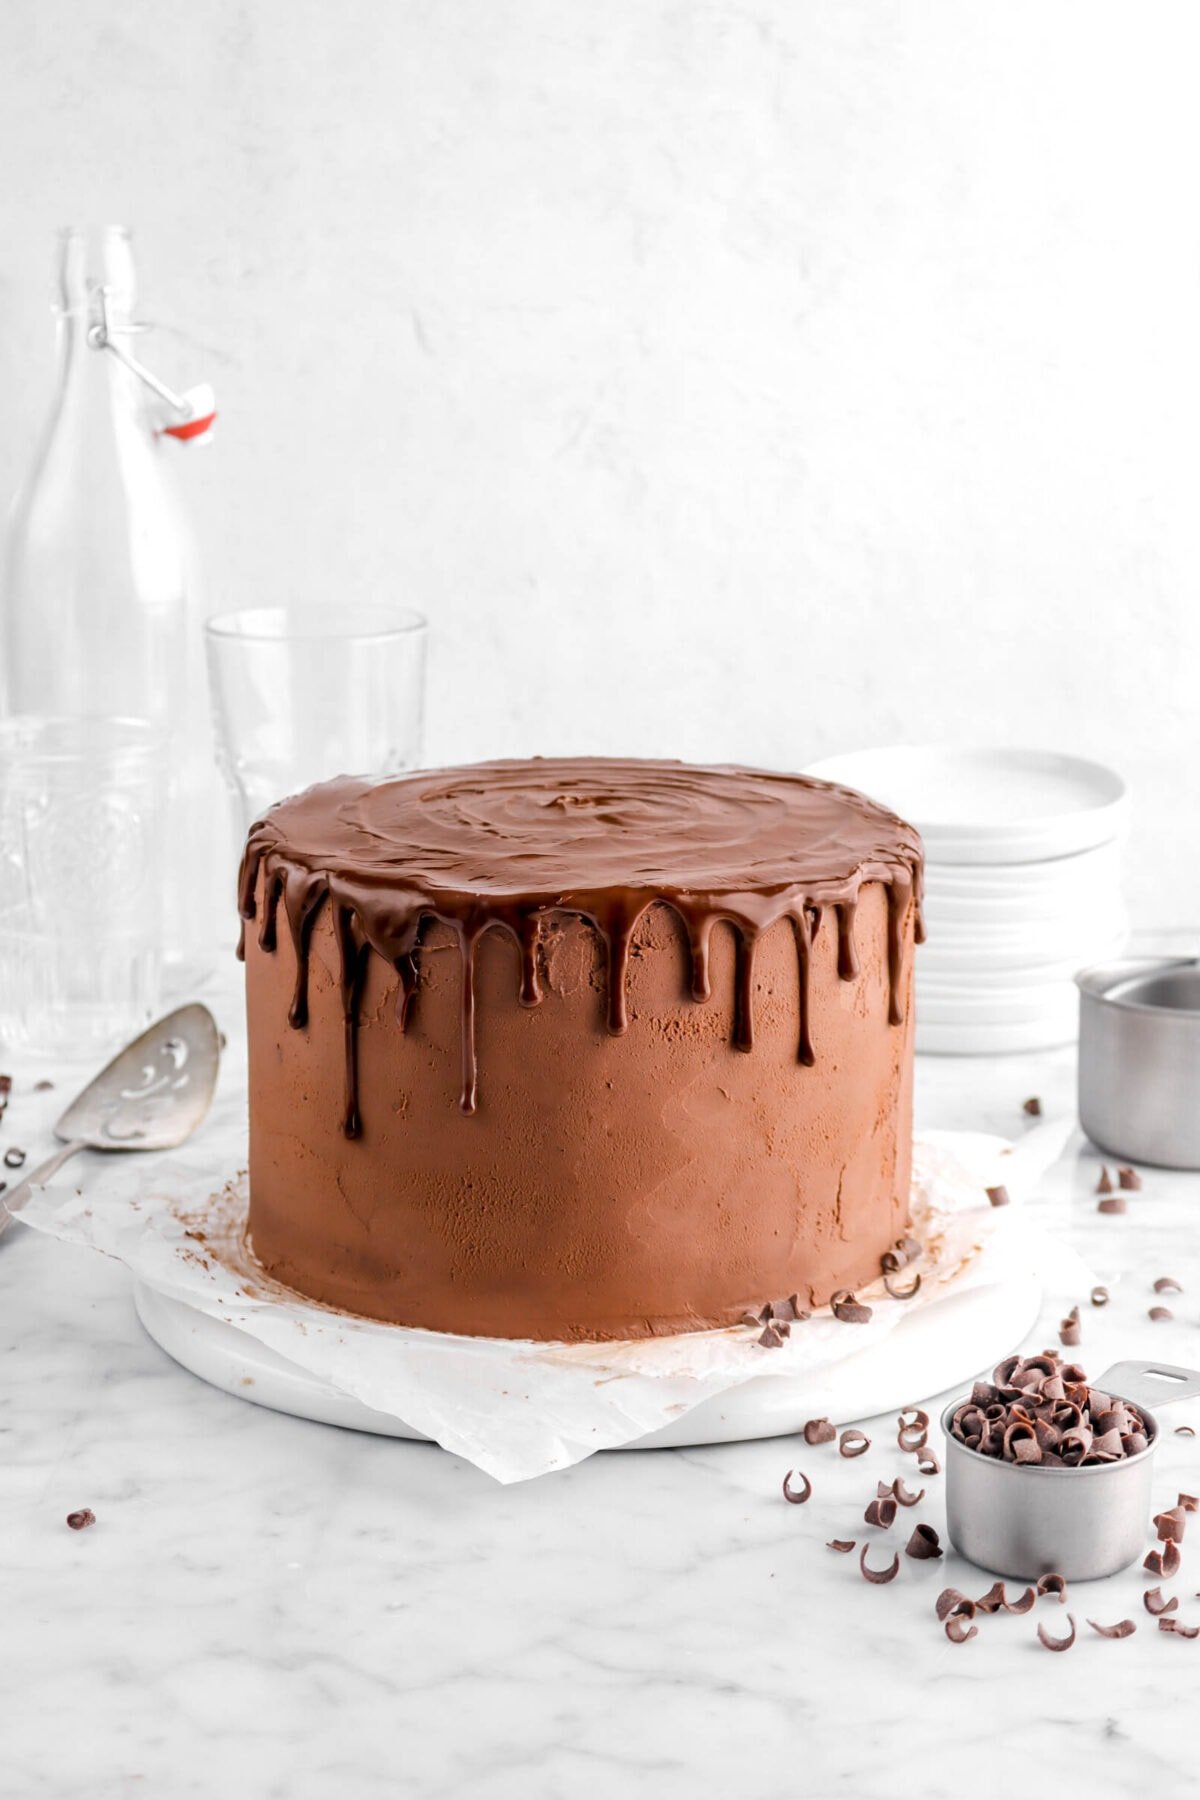 chocolate cake on upside down white plate with parchment paper, chocolate curls and empty glasses behind